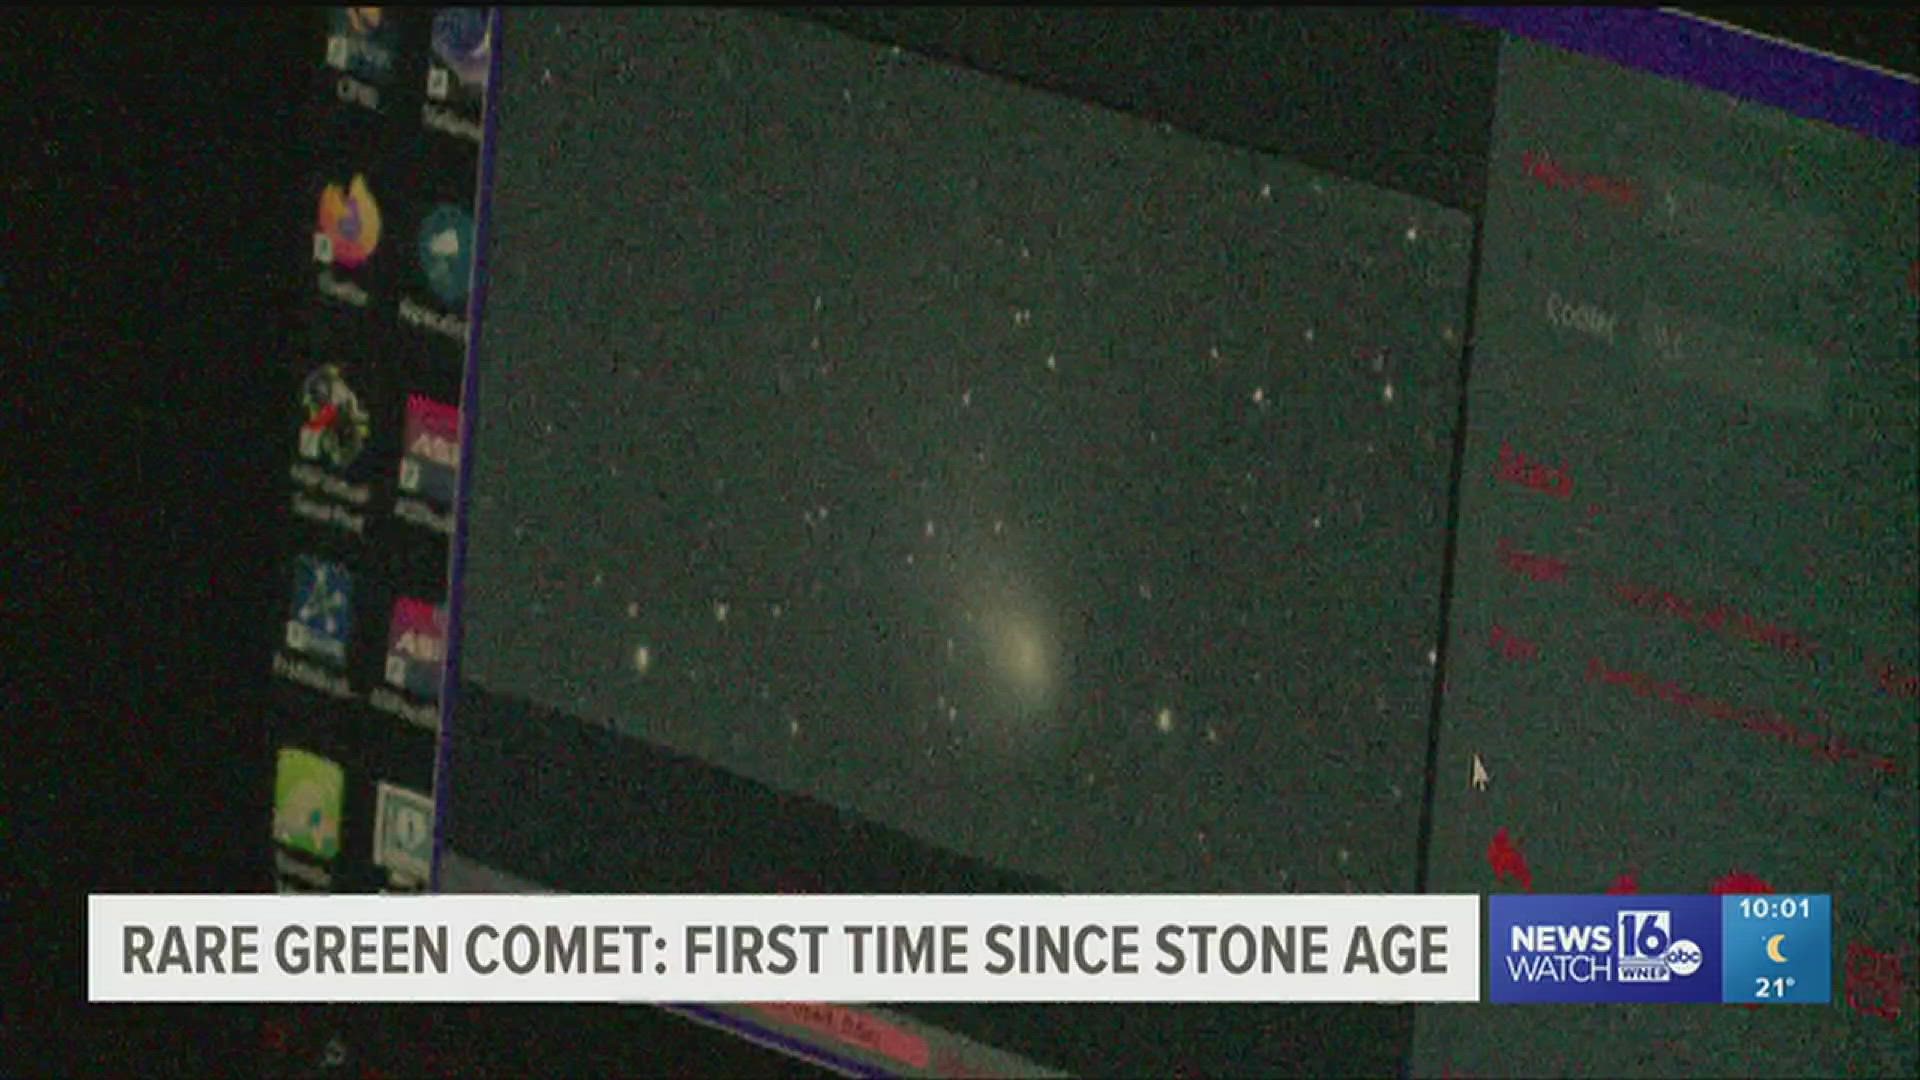 The last time this comet was able to be seen was when cavemen walked the earth.